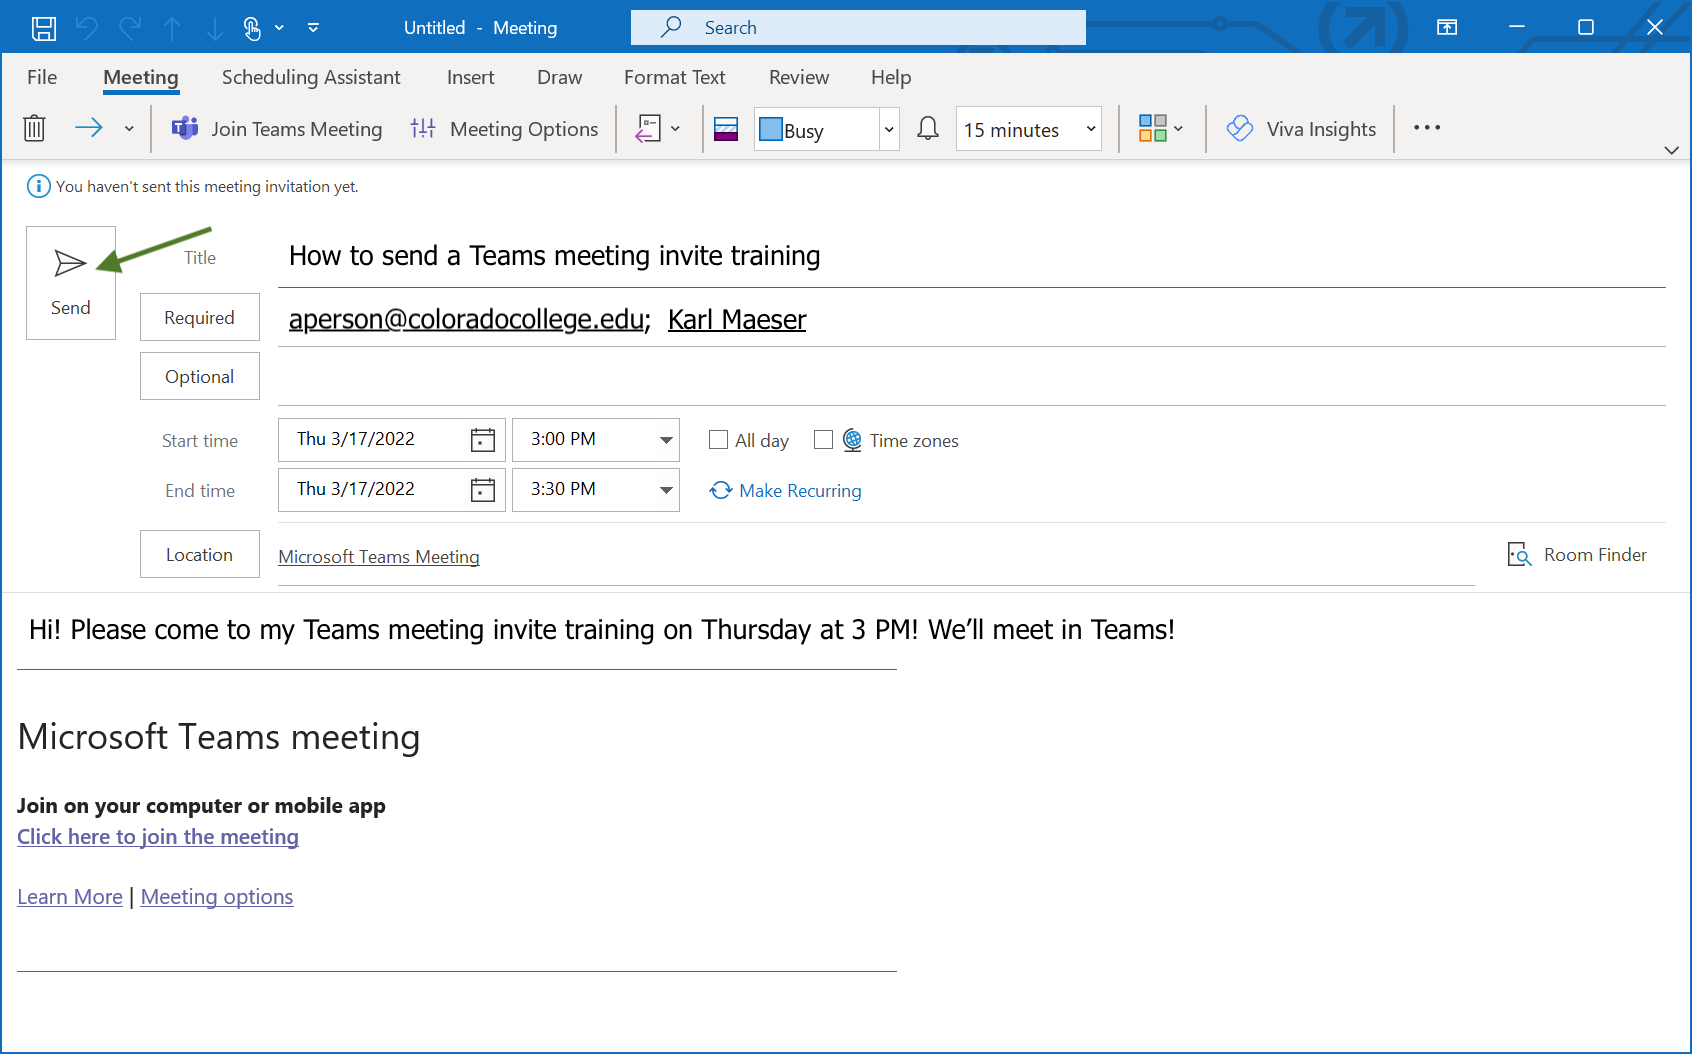 Where to hit Send in an Outlook meeting invite